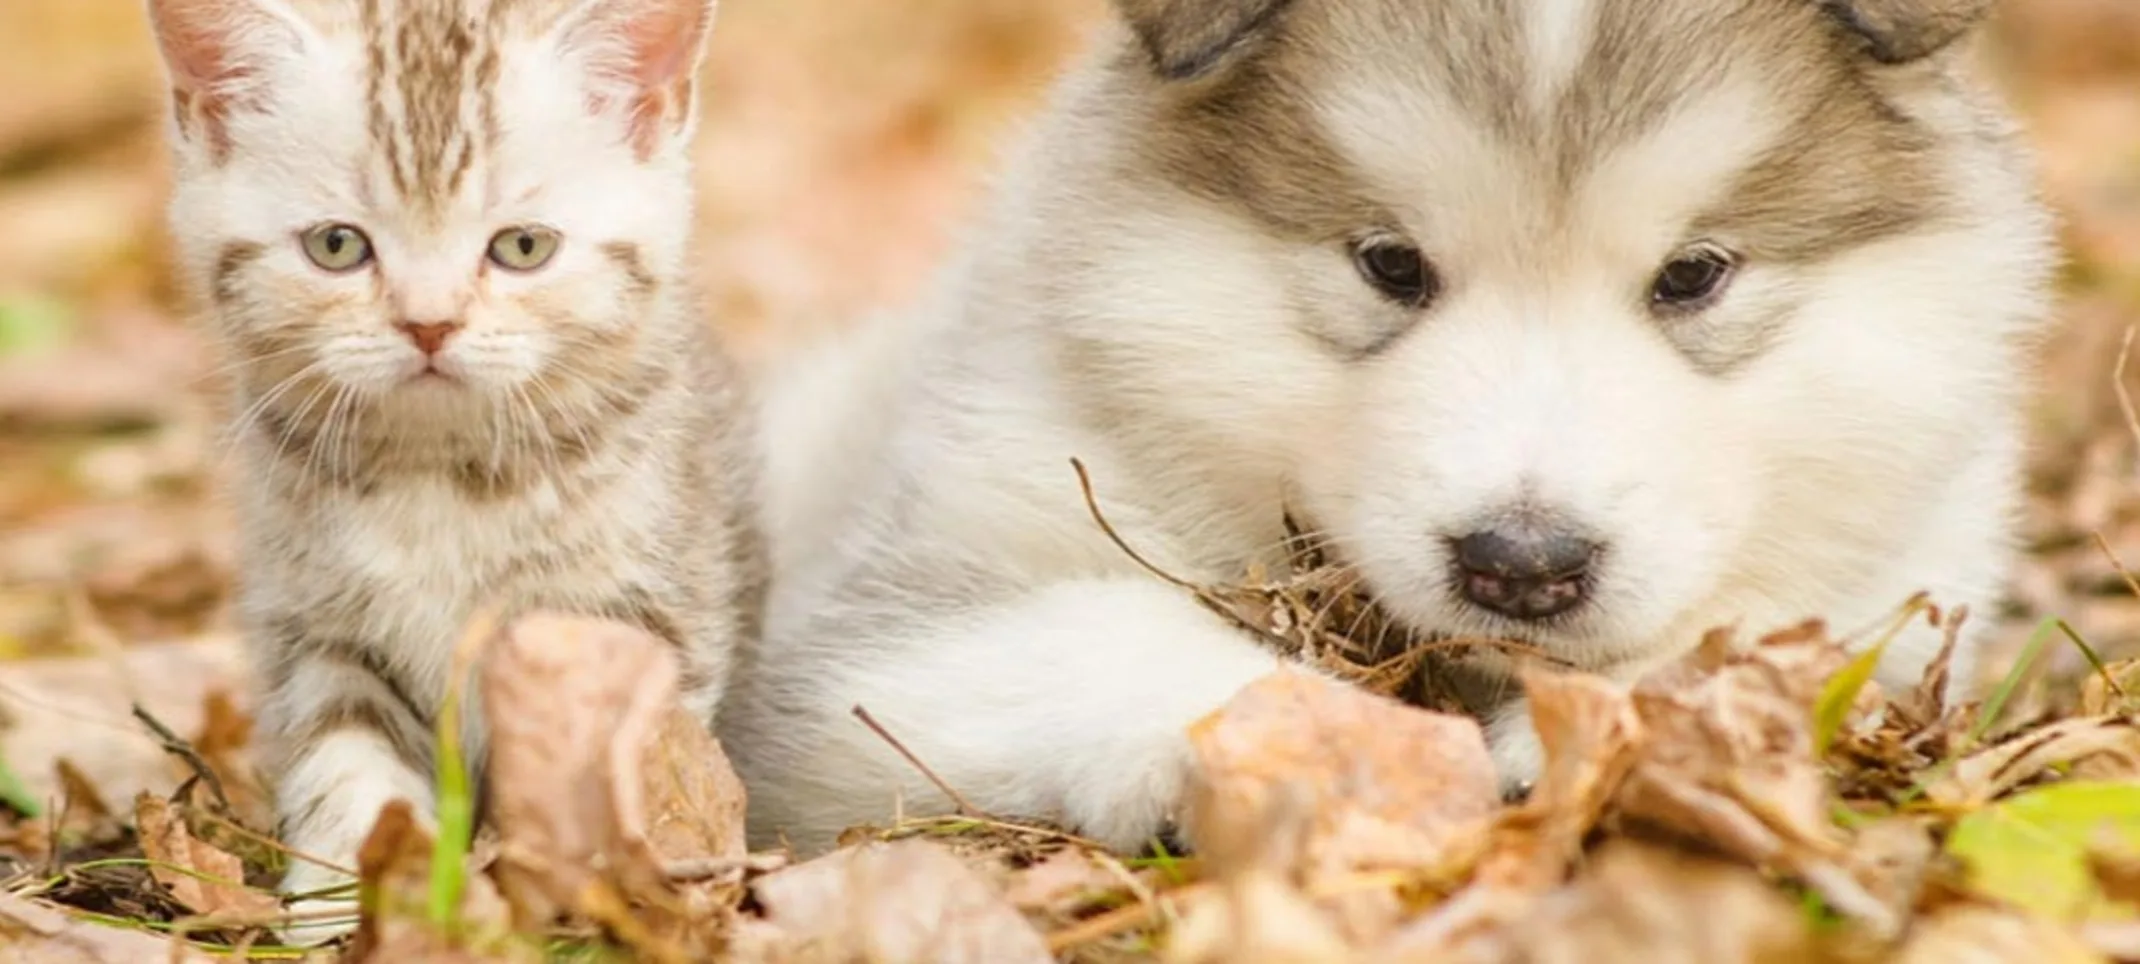 Kitten and puppy laying in leaves of grass